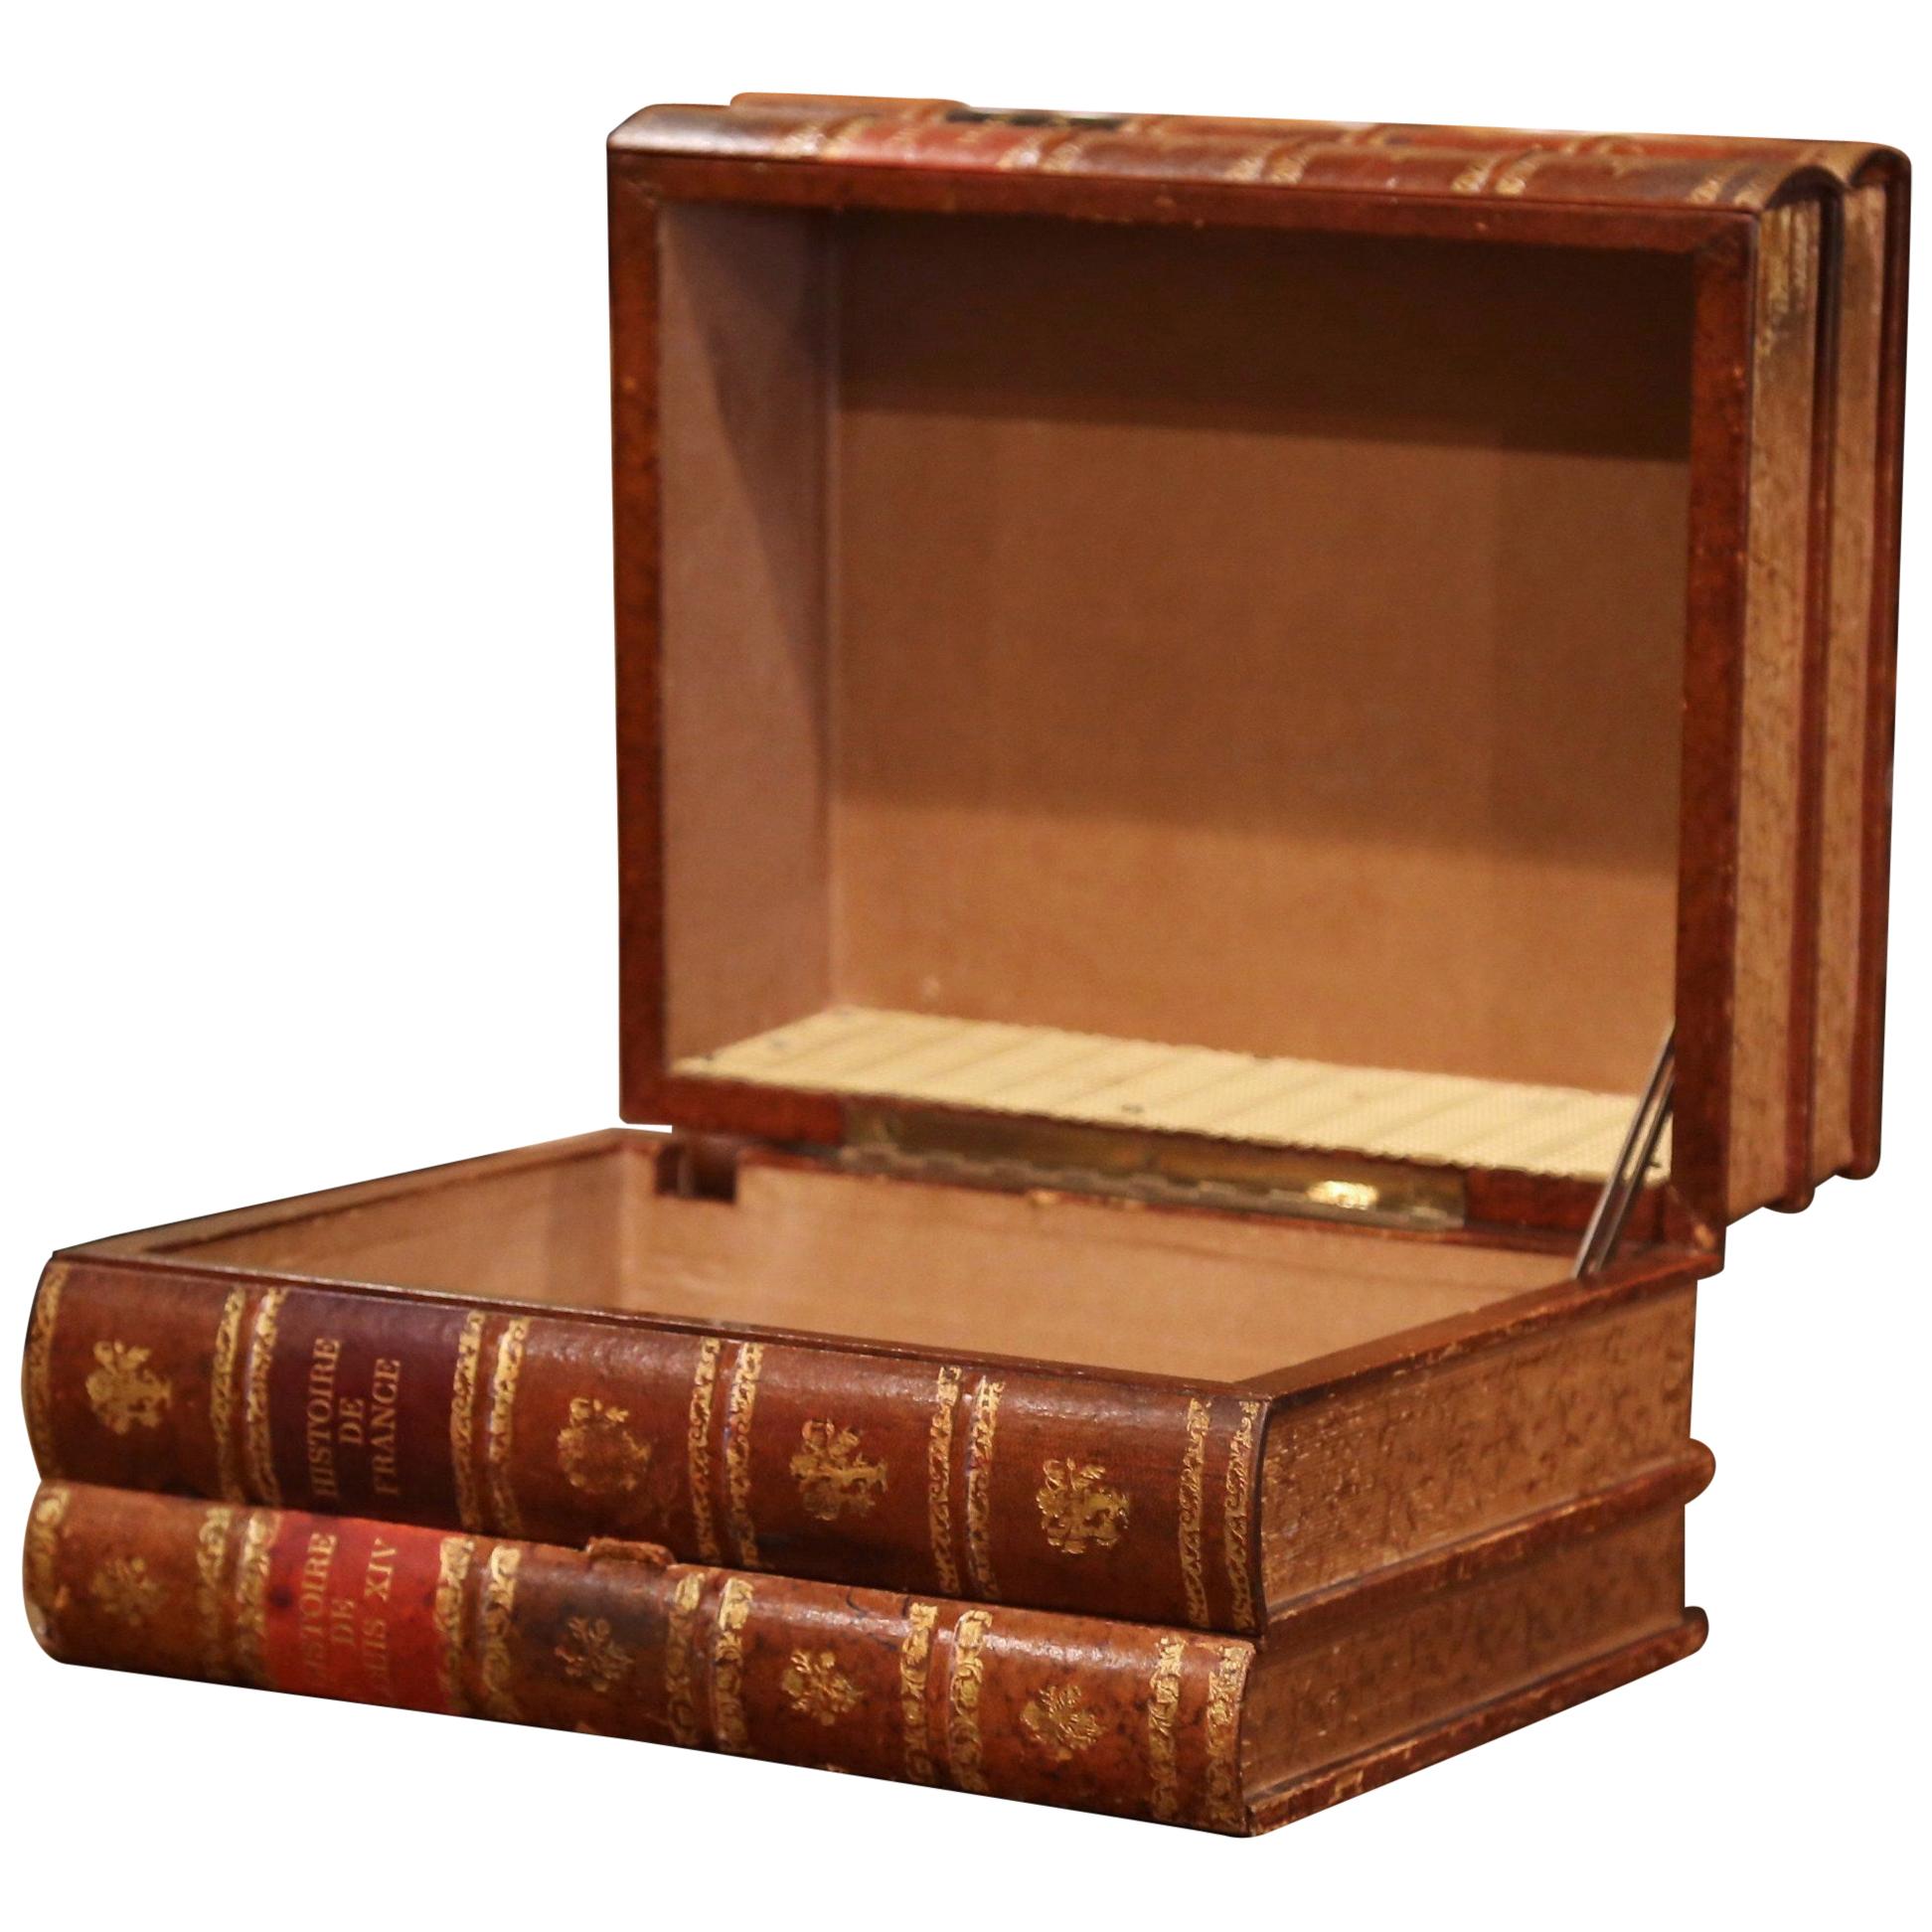 Early 20th Century French Leather Bound Books Decorative Box with Drawer